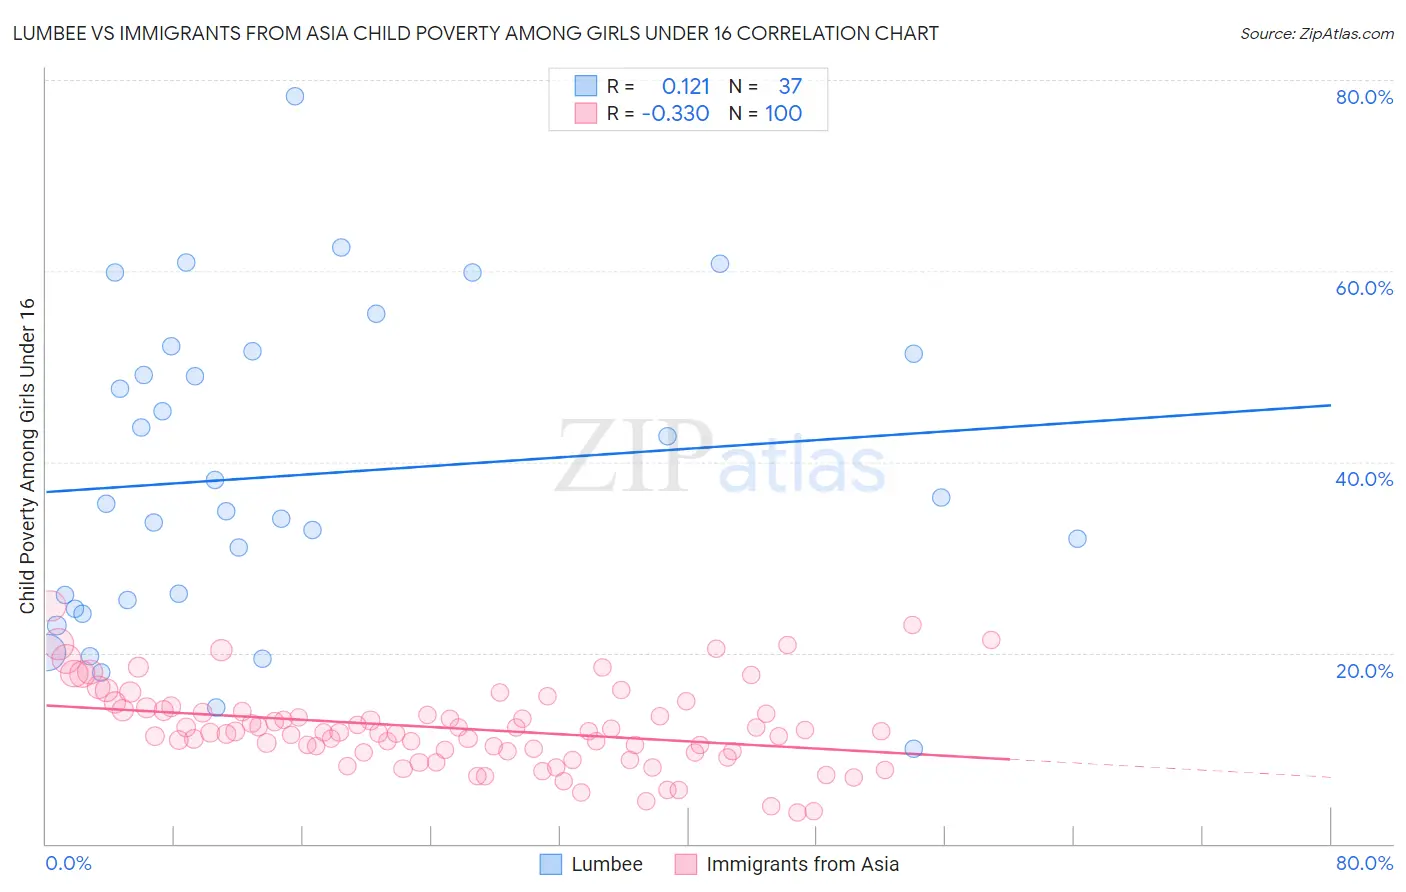 Lumbee vs Immigrants from Asia Child Poverty Among Girls Under 16